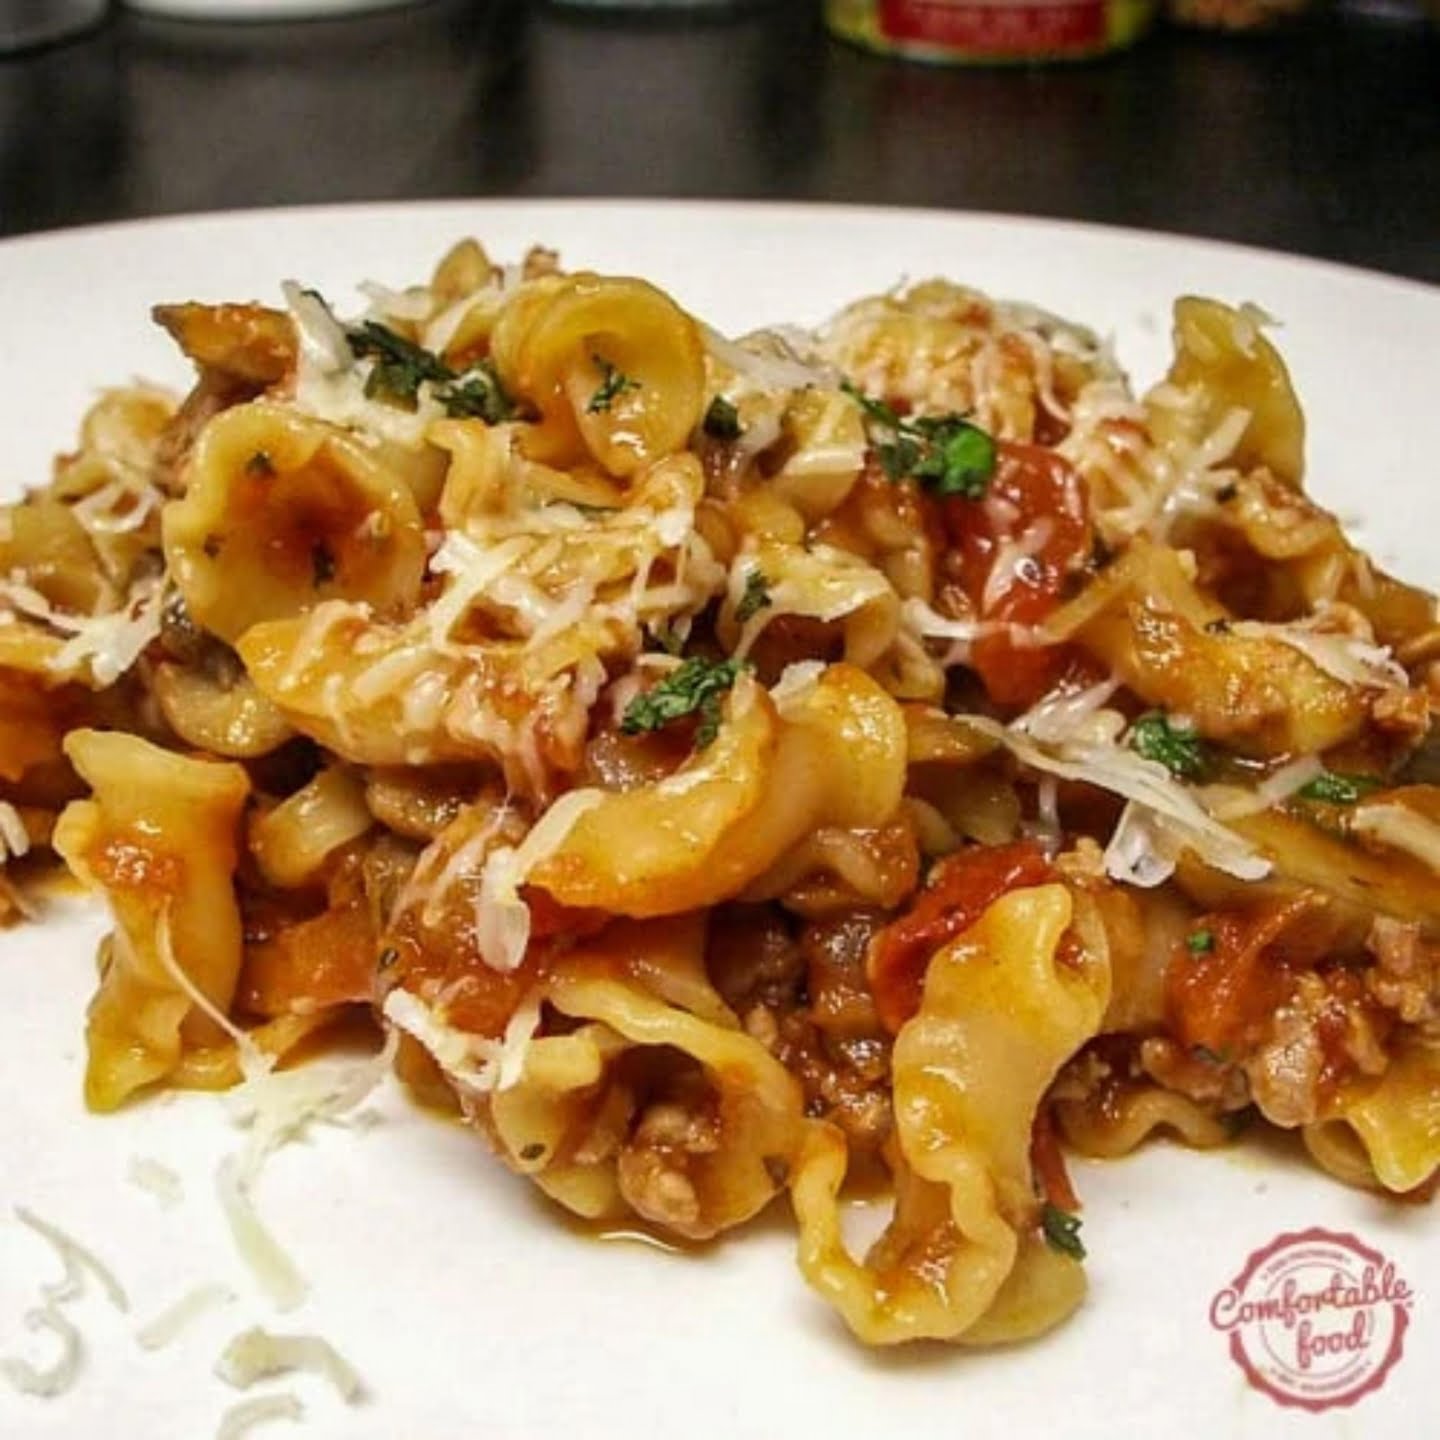 Pasta with sausage, mushrooms, and tomatoes